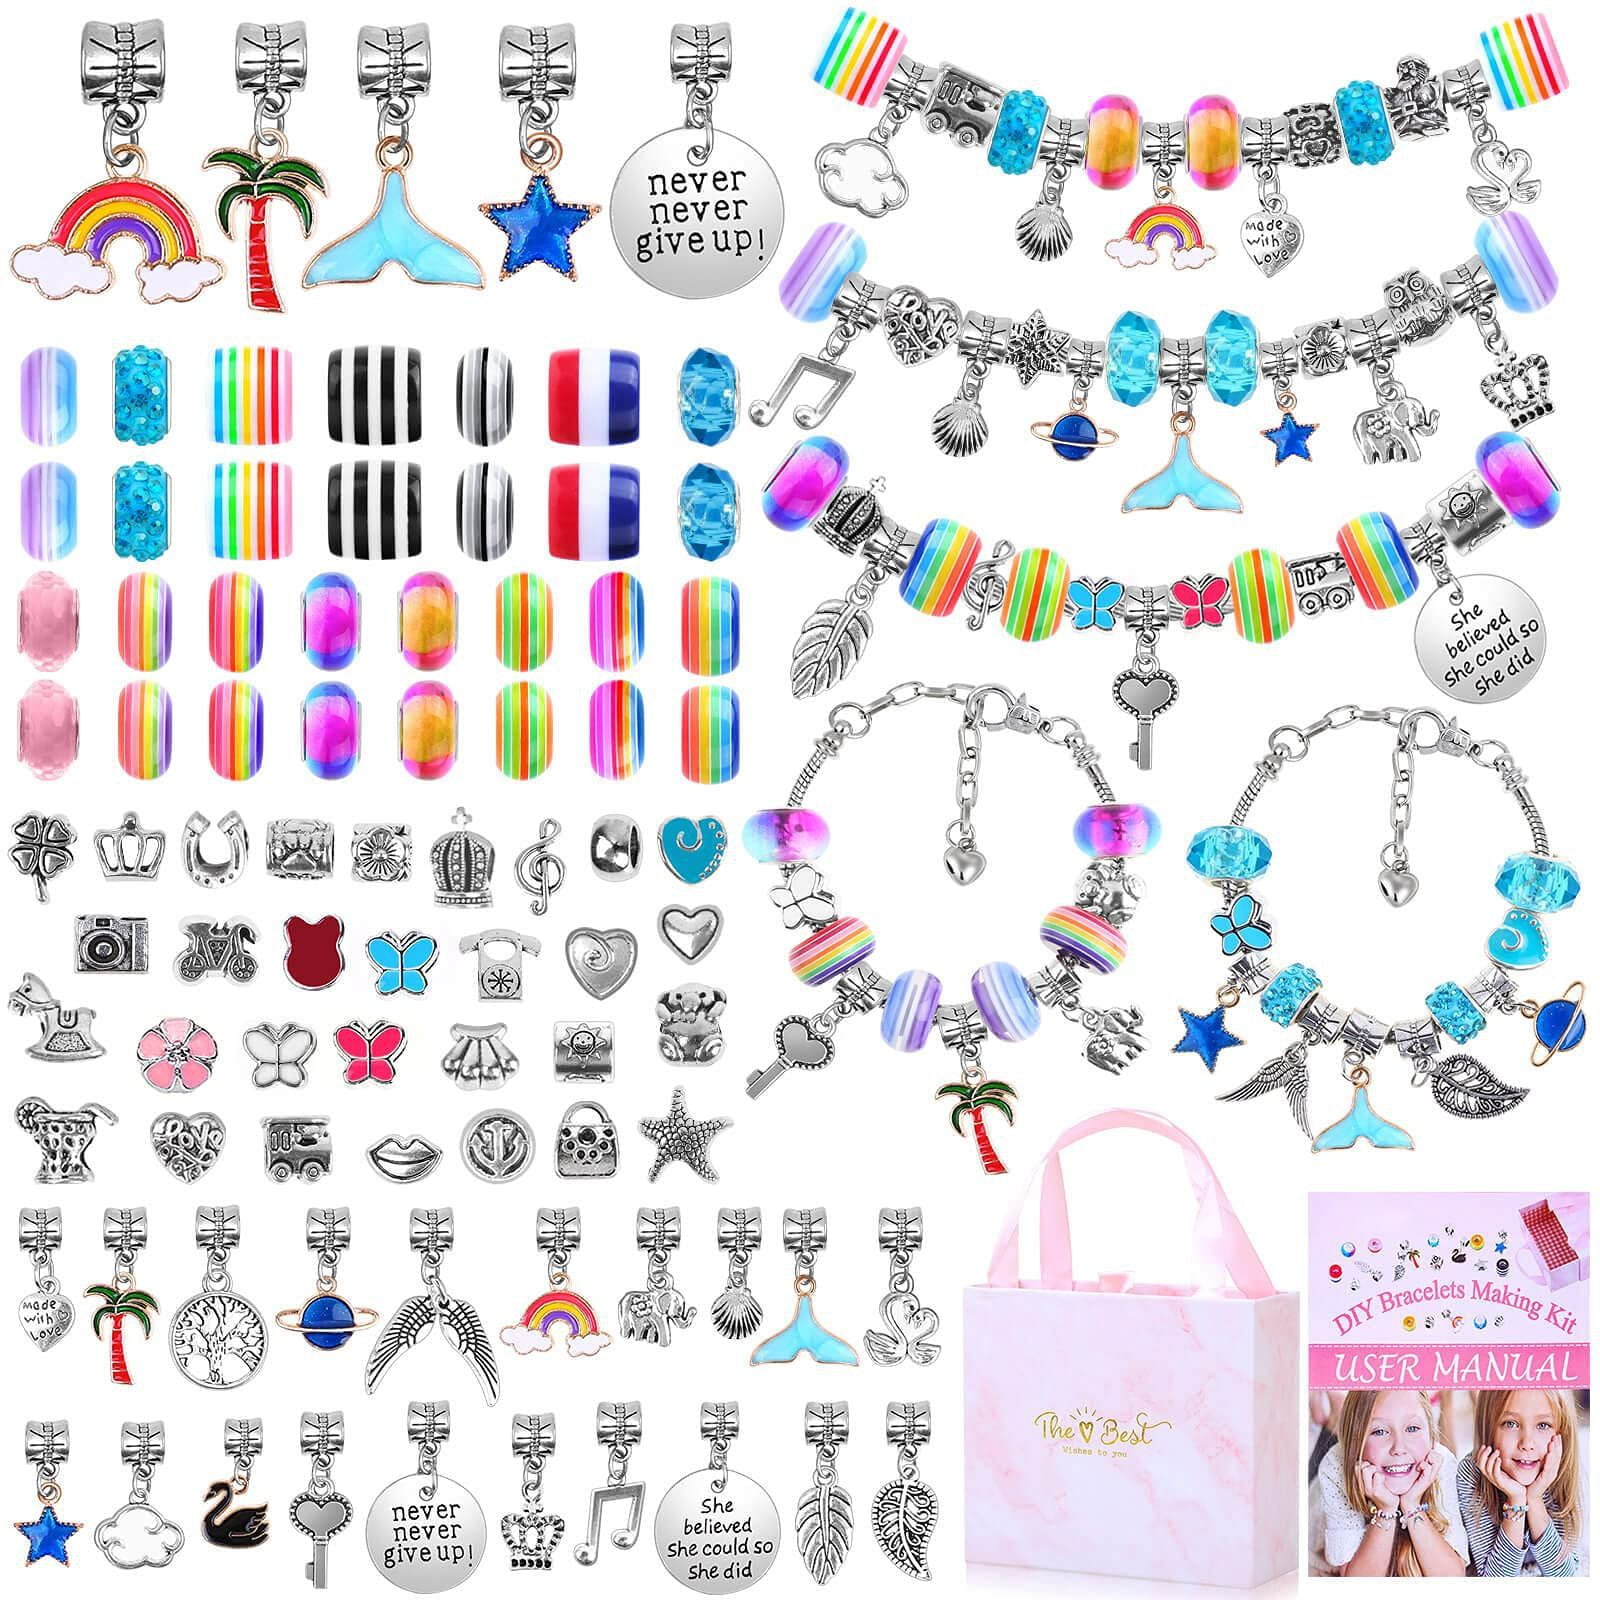 Charm Bracelet Making Kit for Teens Girls,Super Cute Jewelry Making Charms  Unicorn/Mermaid Crafts Gifts Set for Ages 8-12